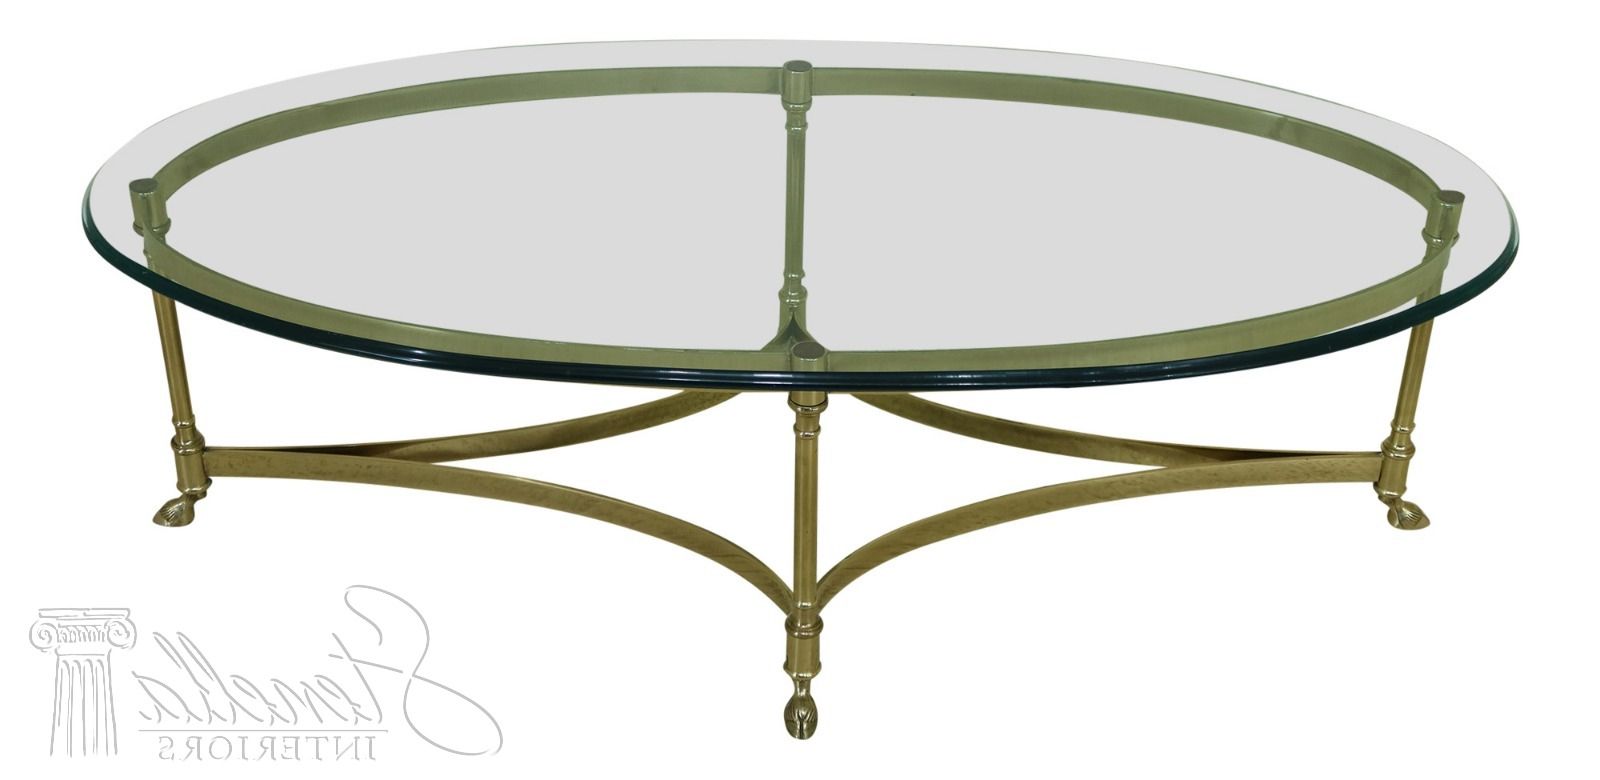 Ebay Within Well Liked Glass And Pewter Oval Coffee Tables (View 9 of 10)